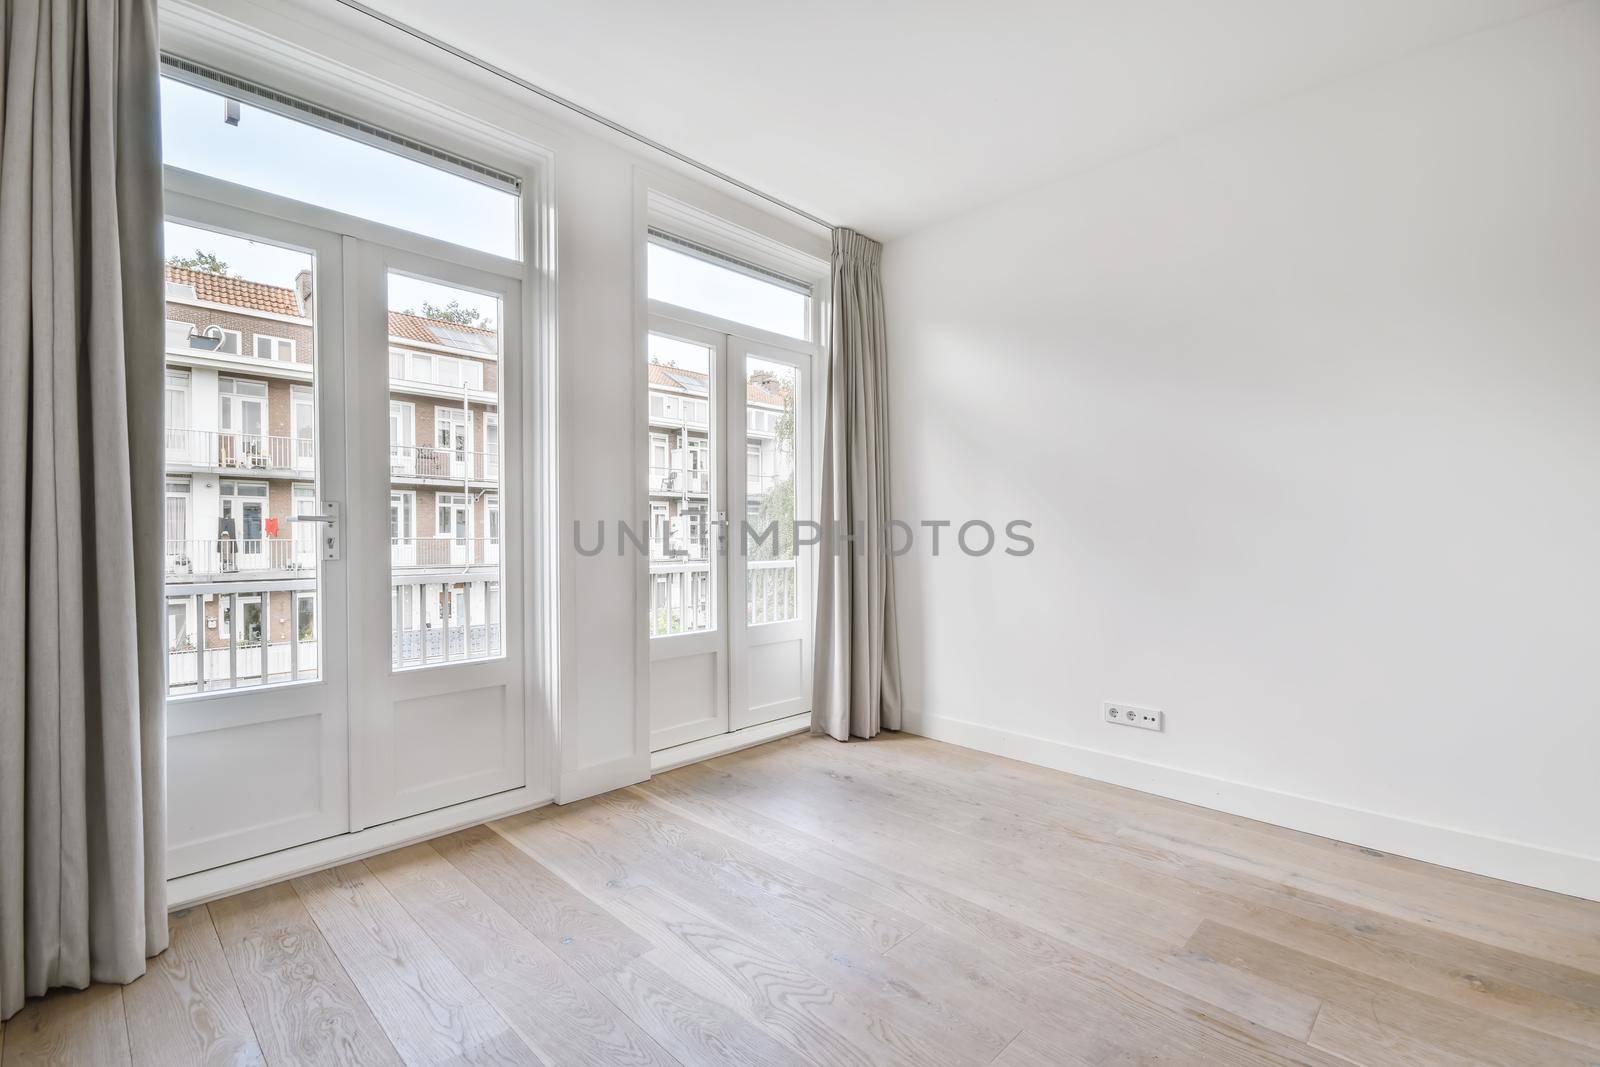 Spacious, bright and beautiful room with large windows and parquet floors